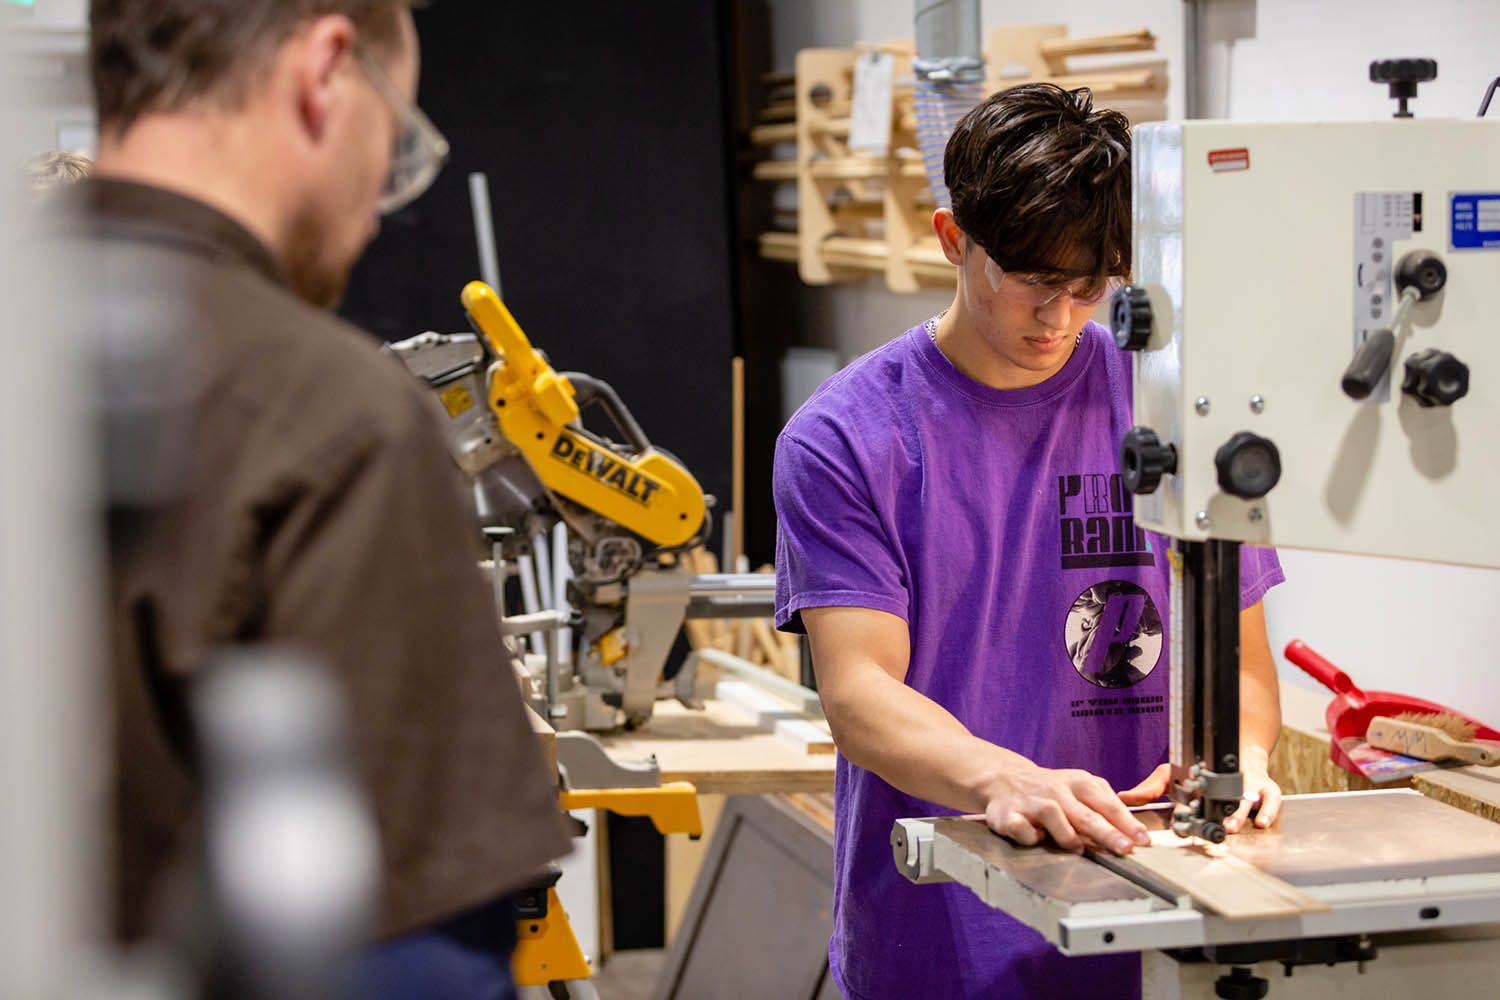 A student using tools in one of the workshops at Locksbrook campus